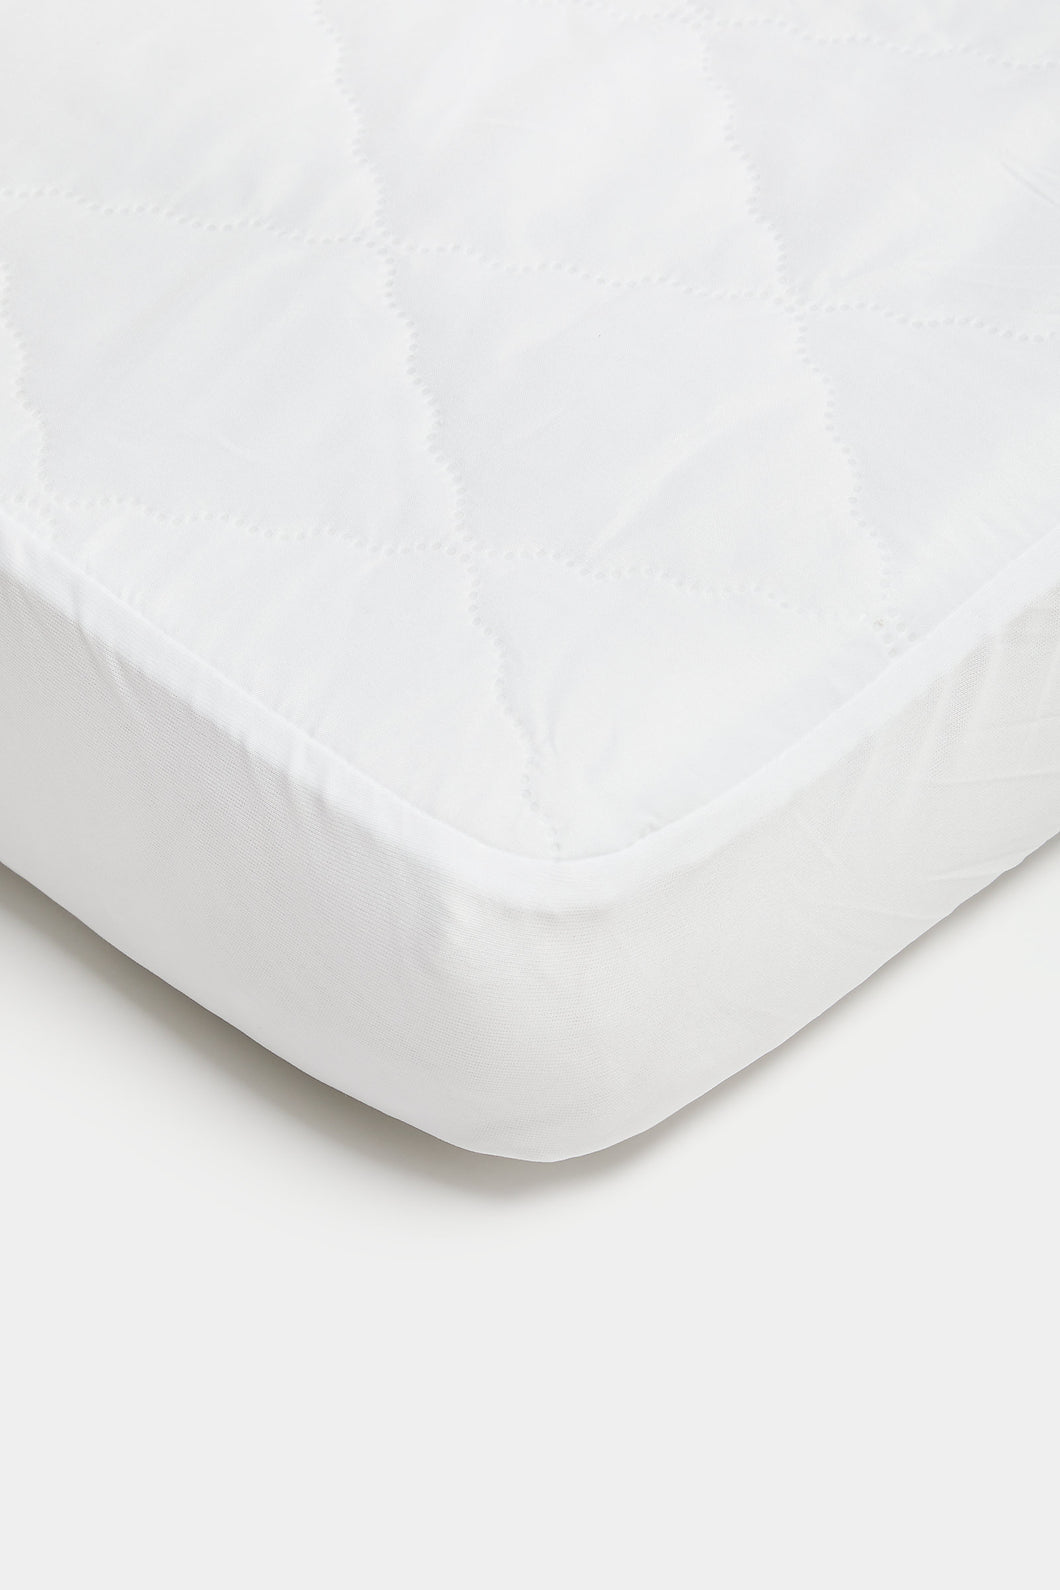 Mothercare Cot Bed Mattress Protector